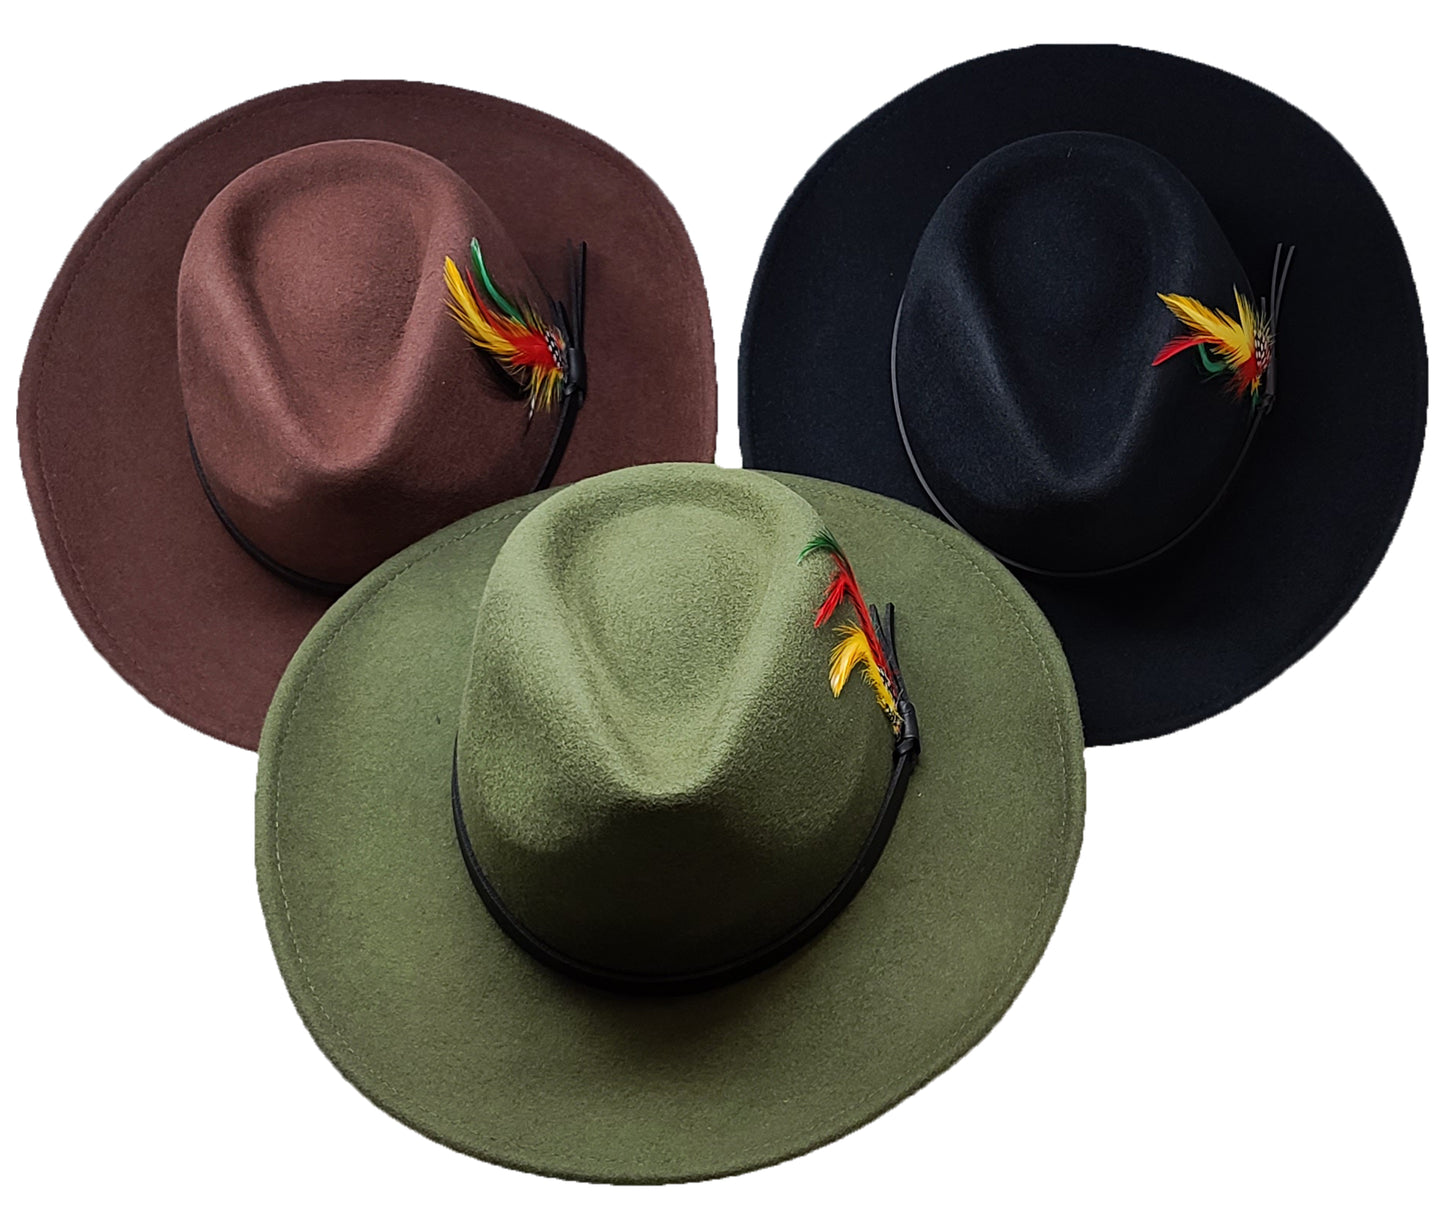 Wide Brim Cowboy Hat | Outback Crushable Wool